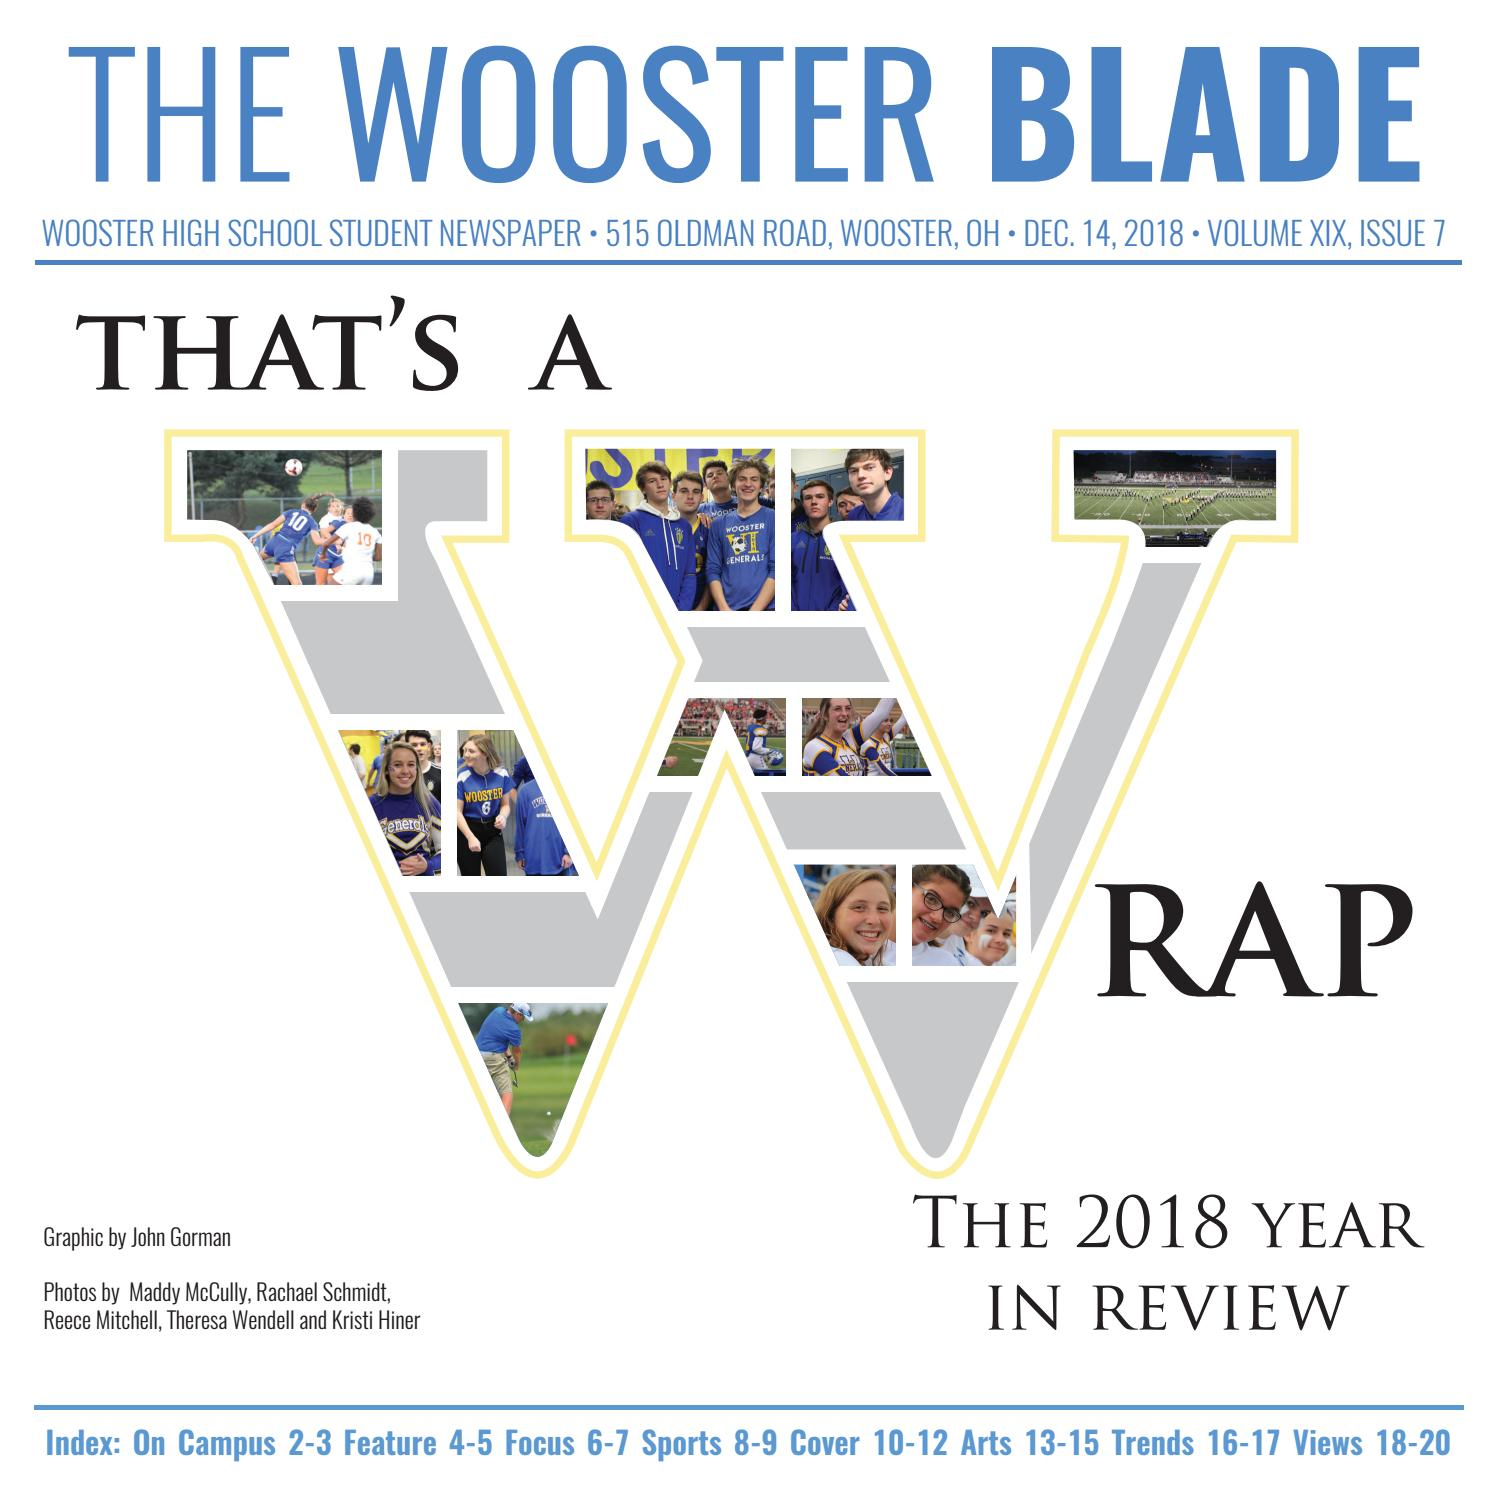 The Wooster Blade, Volume Xix, Issue 7The Wooster Blade